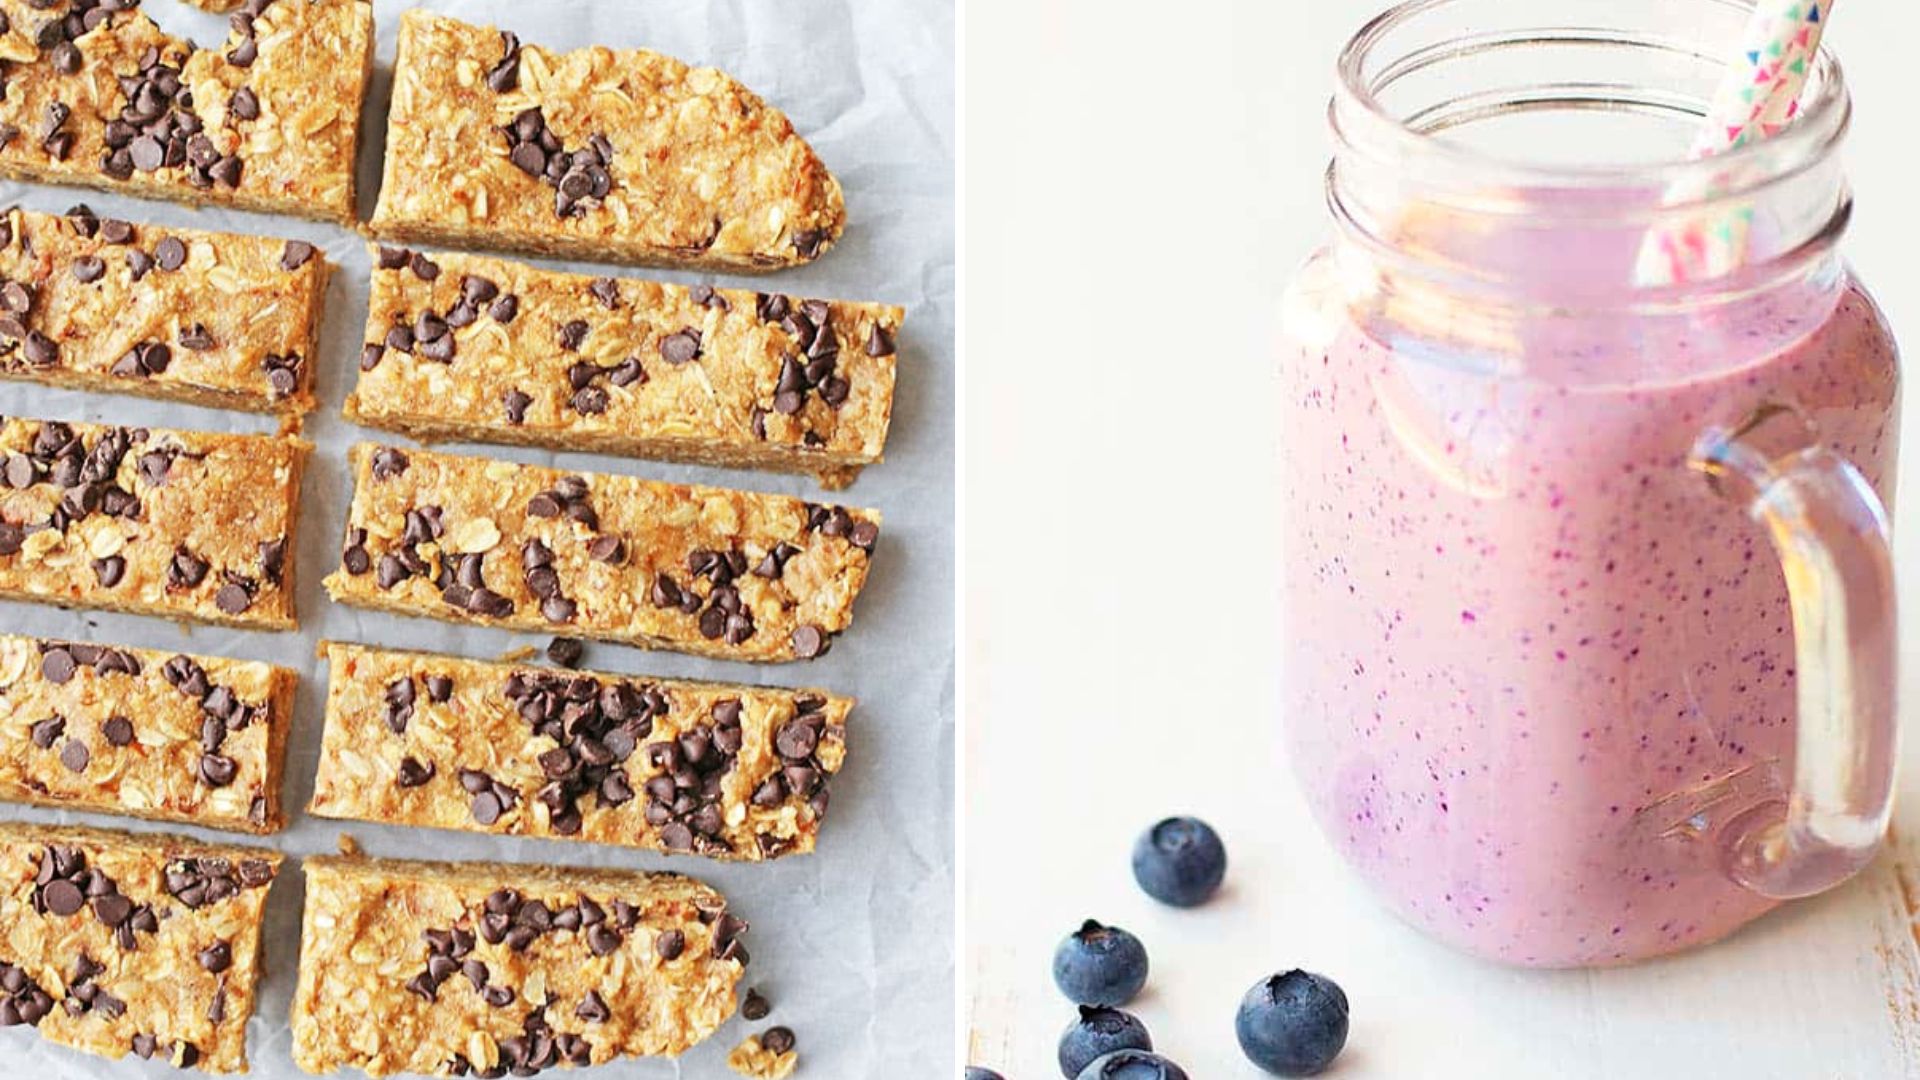 Two images side by side: Peanut butter chocolate chip granola bars and blueberry cheesecake smoothie.